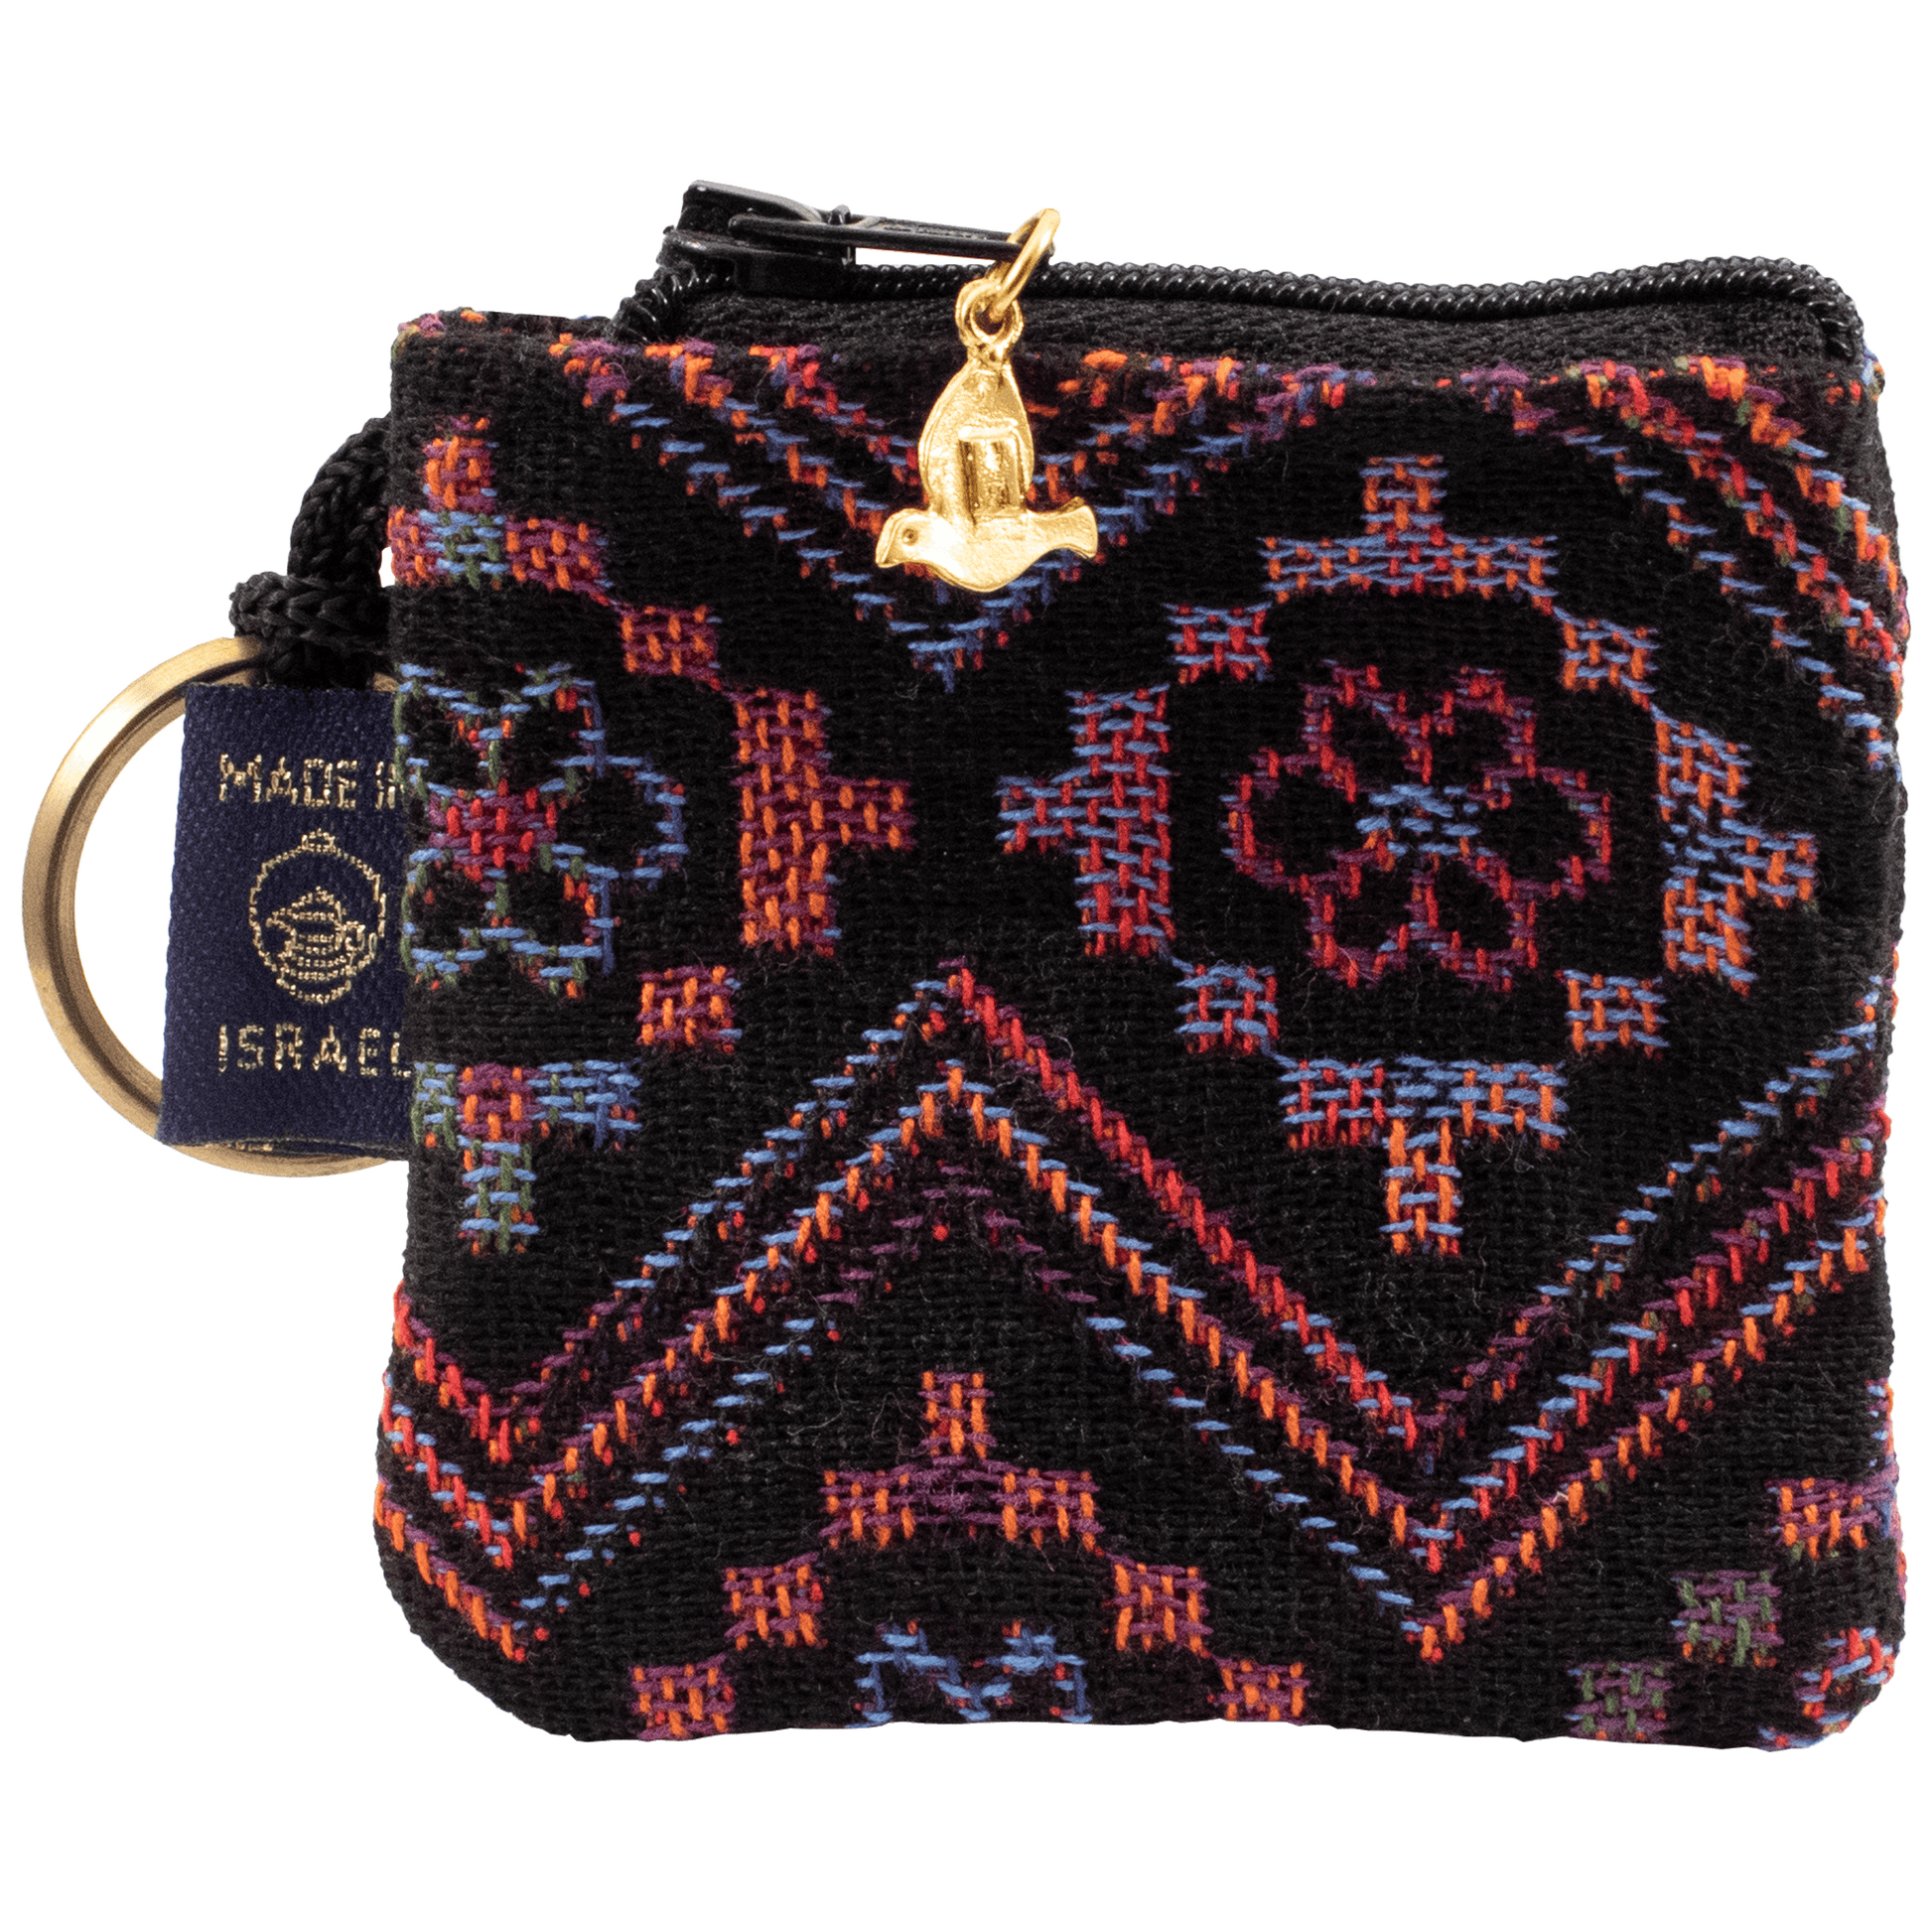 Keychain Change Purse Black with colorful Flowers in geometric square